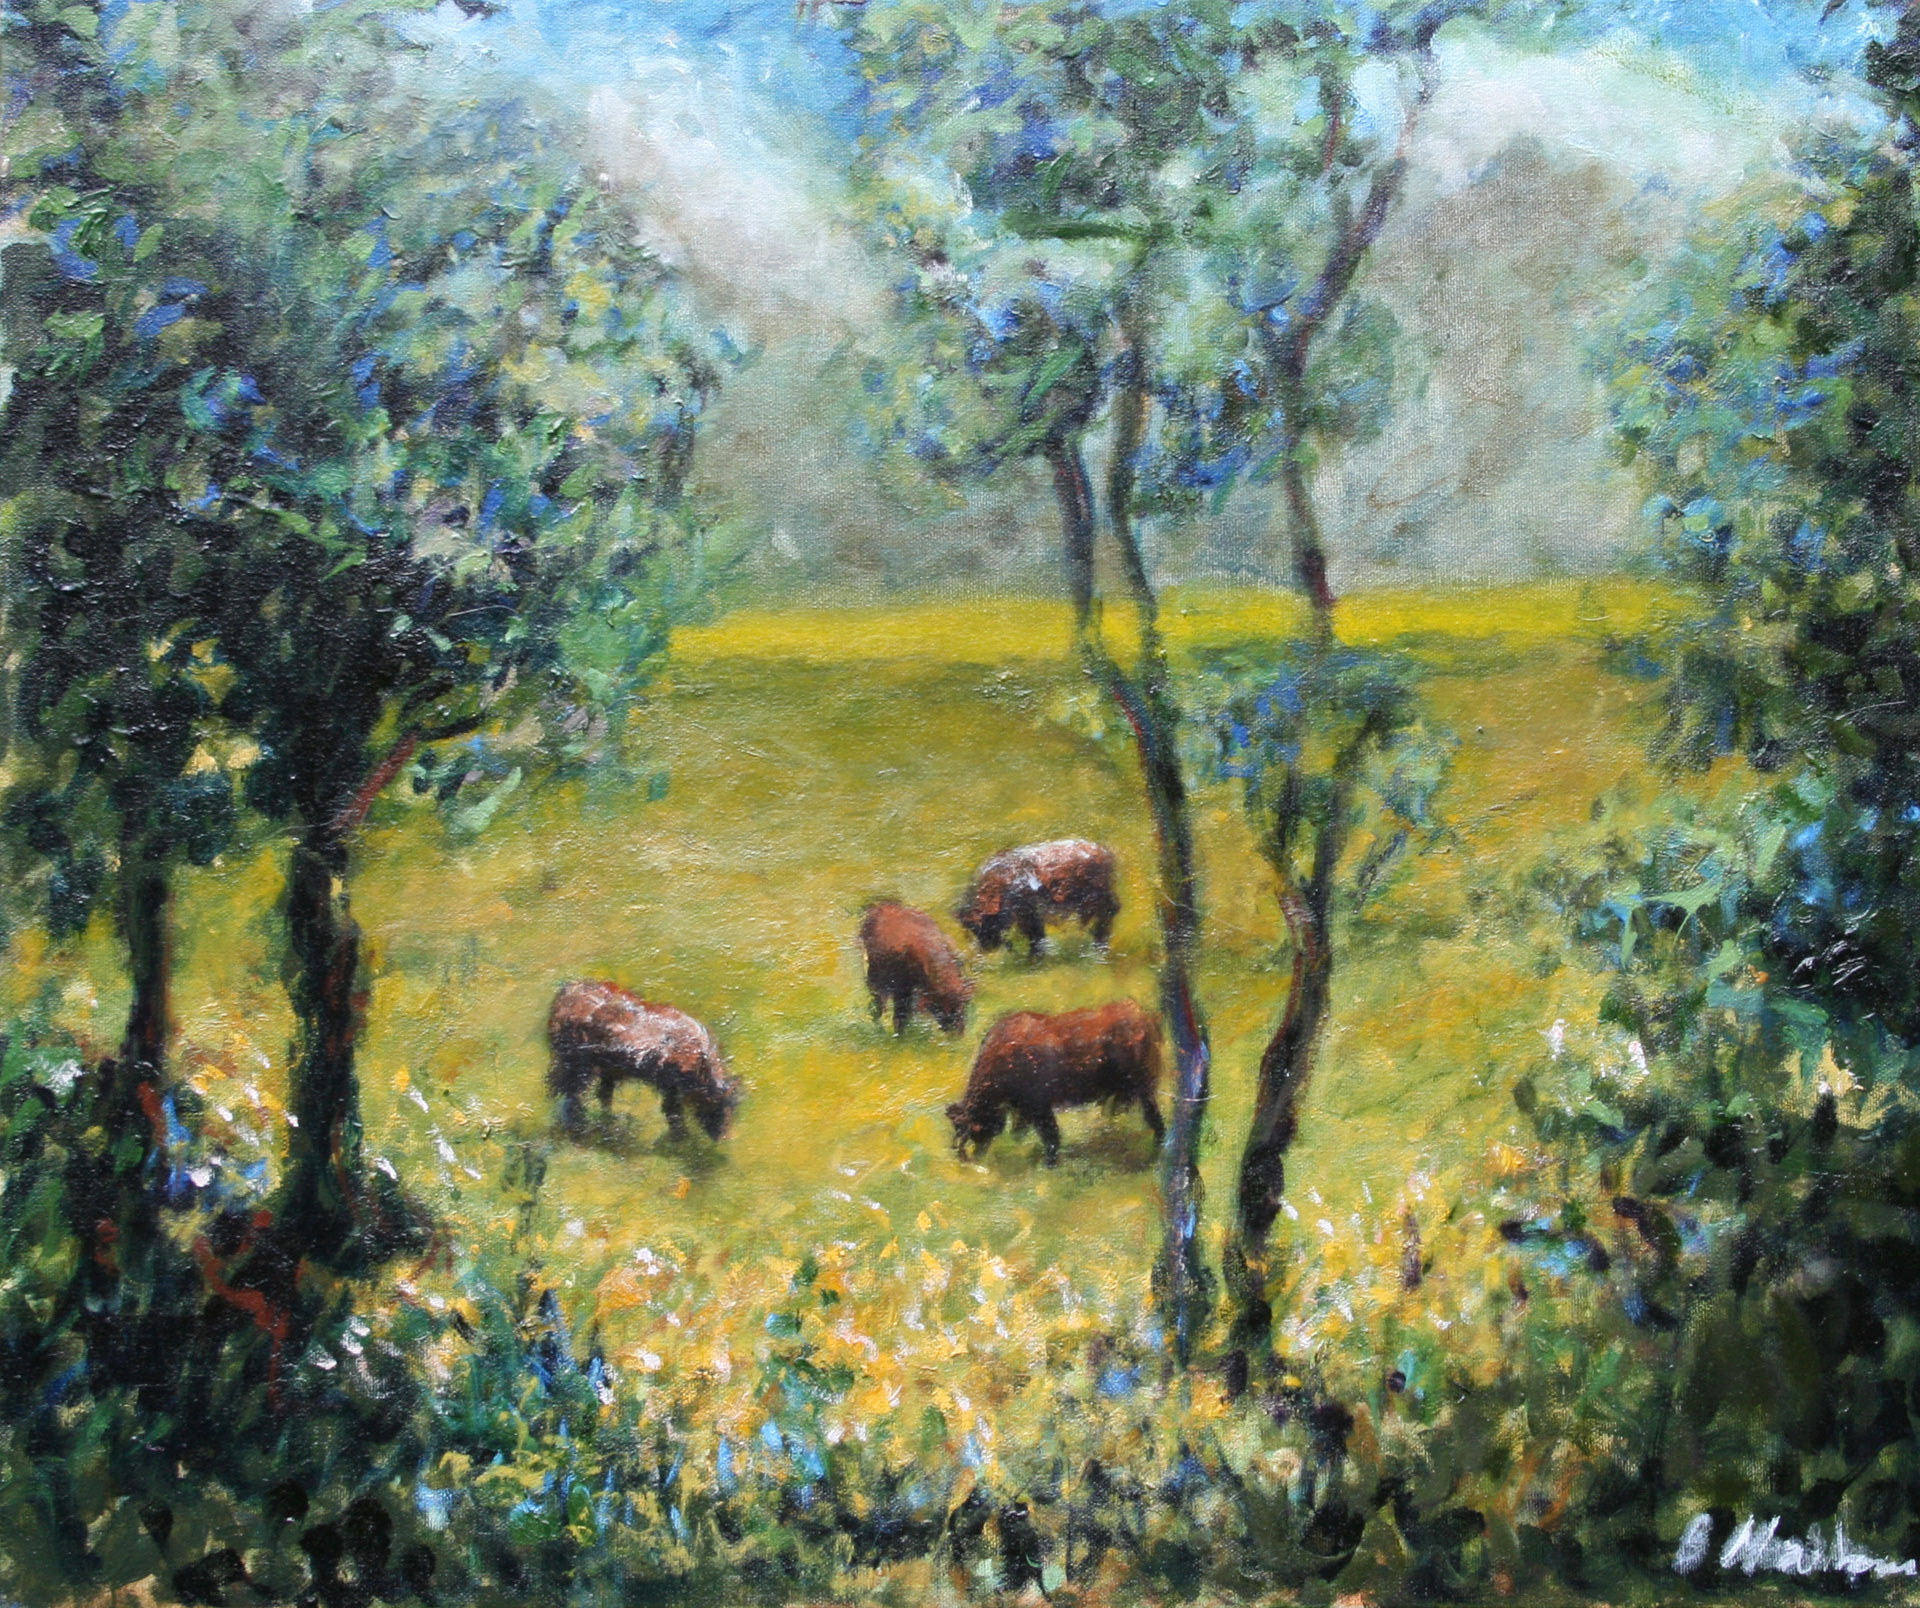 Pasture on The Road to El Rodeo, 20"x 24". Oil on canvas. US$ 1,600.